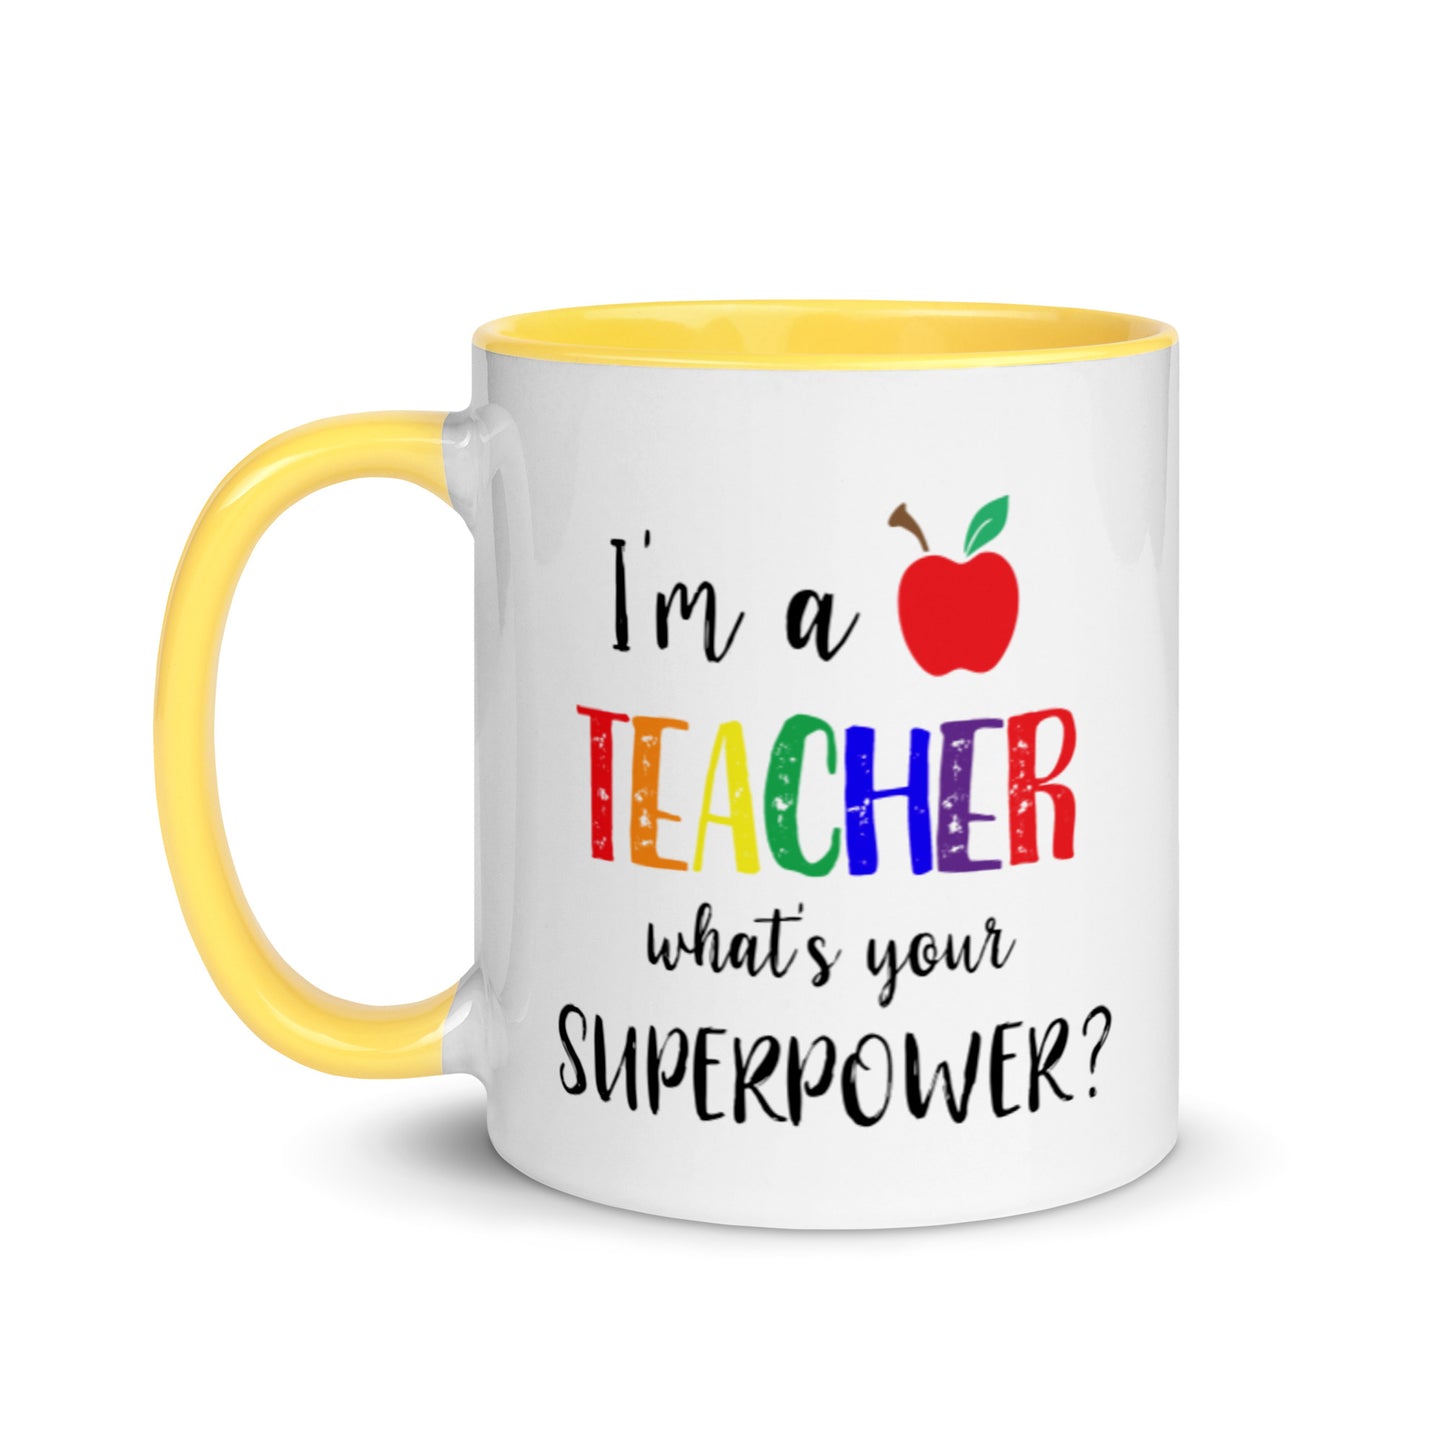 I'm a teacher what's your superpower mug with yellow interior